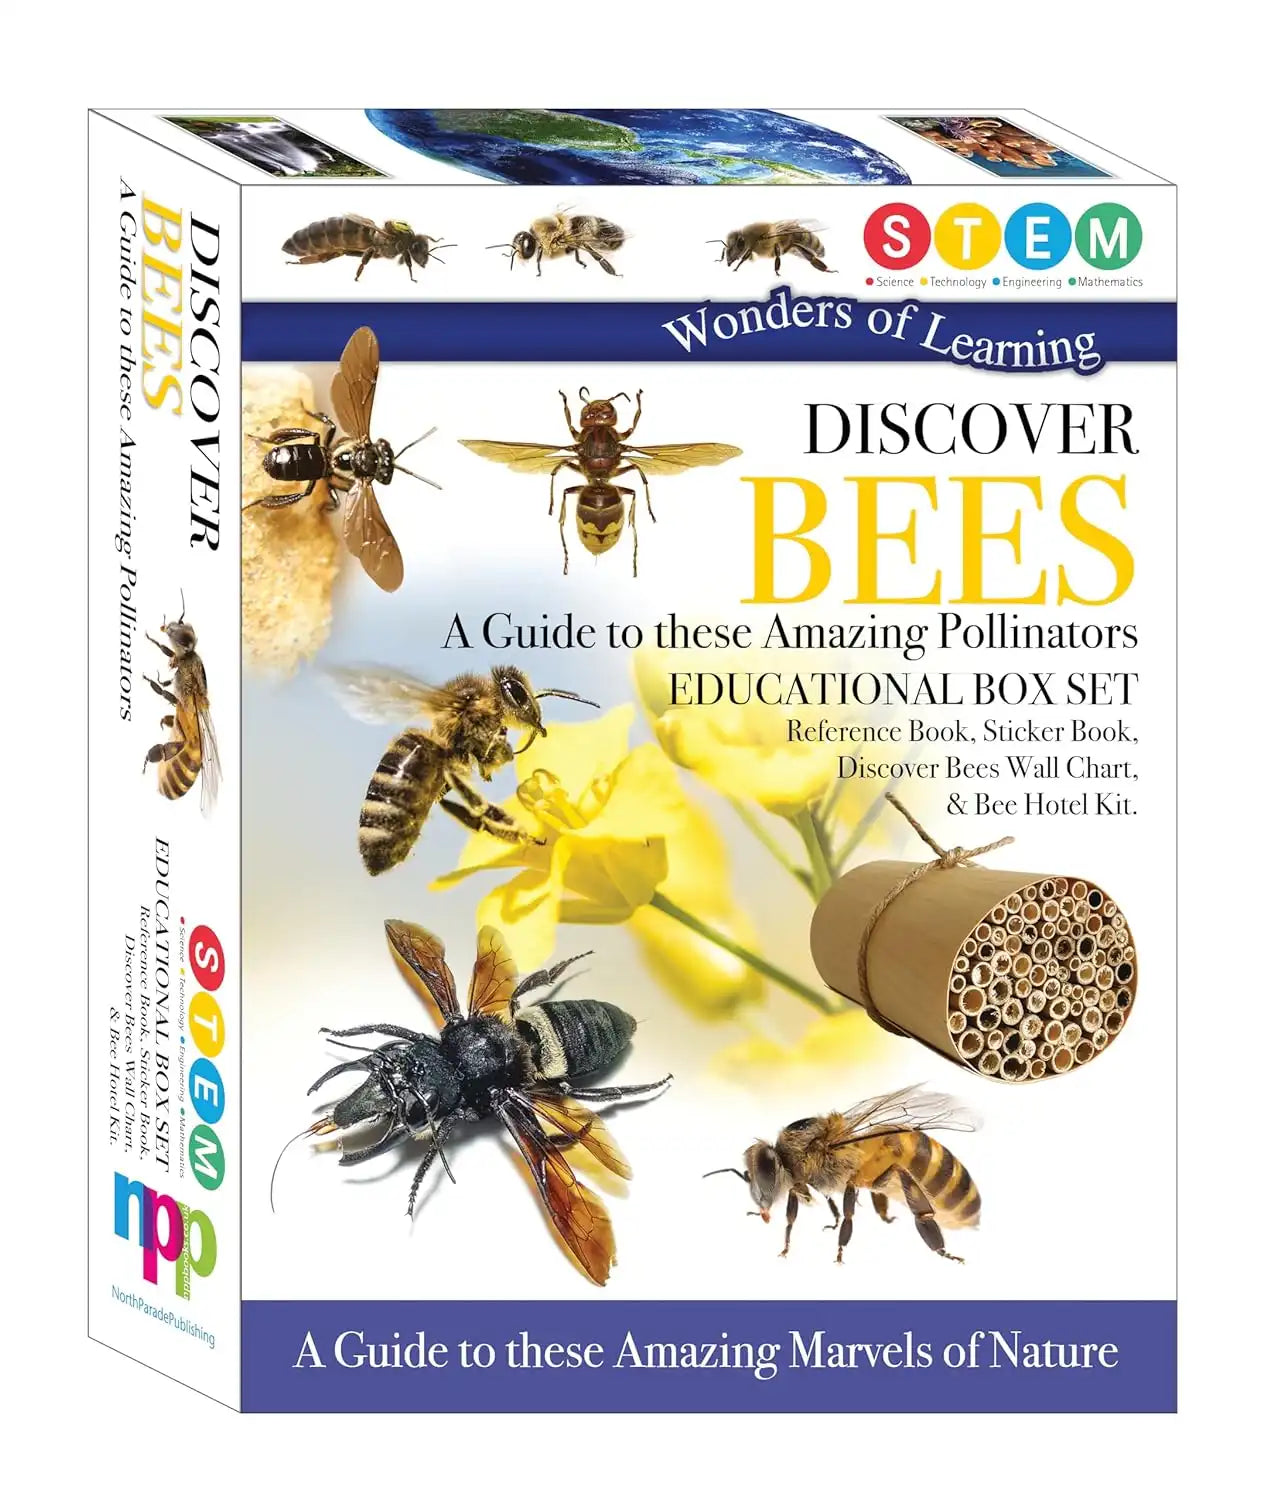 Wonders of Learning : Discover Bees (Educational Box Set)